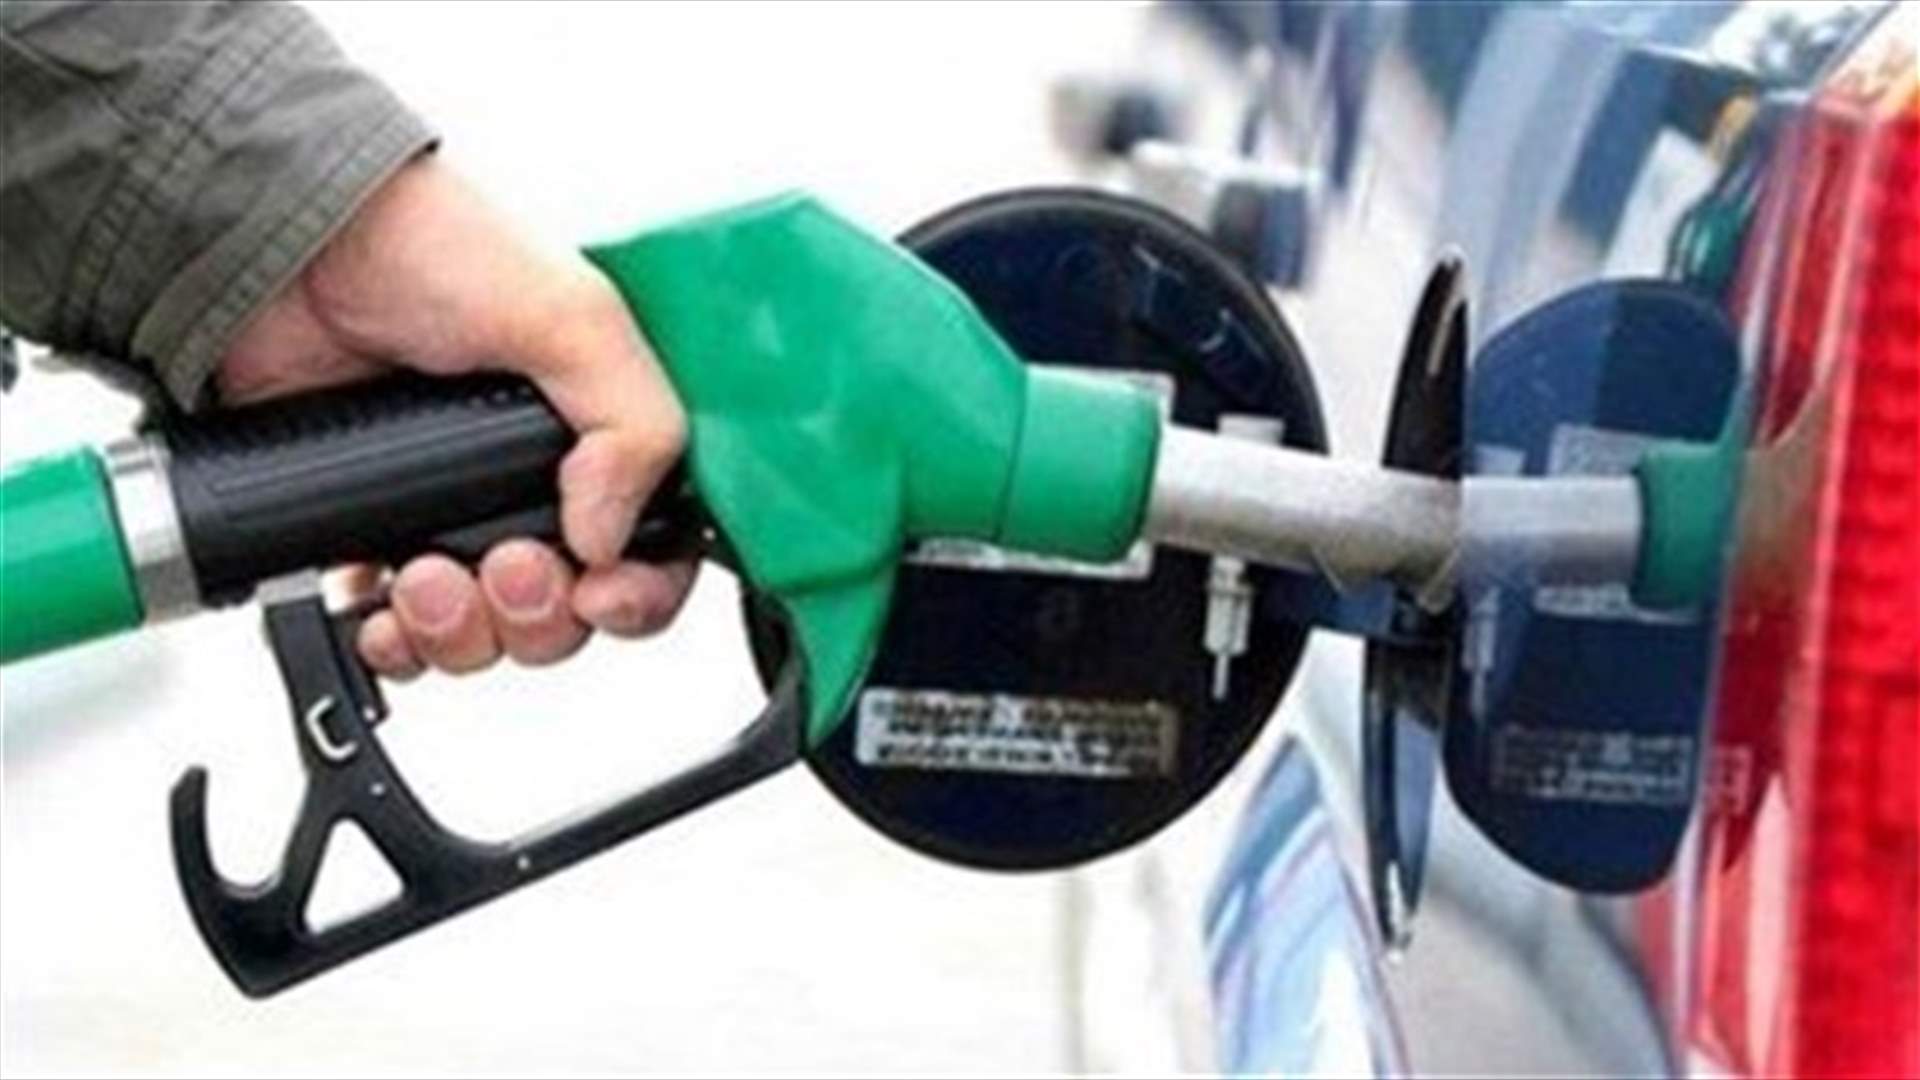 Price of 95 octane fuel increases 700 LBP